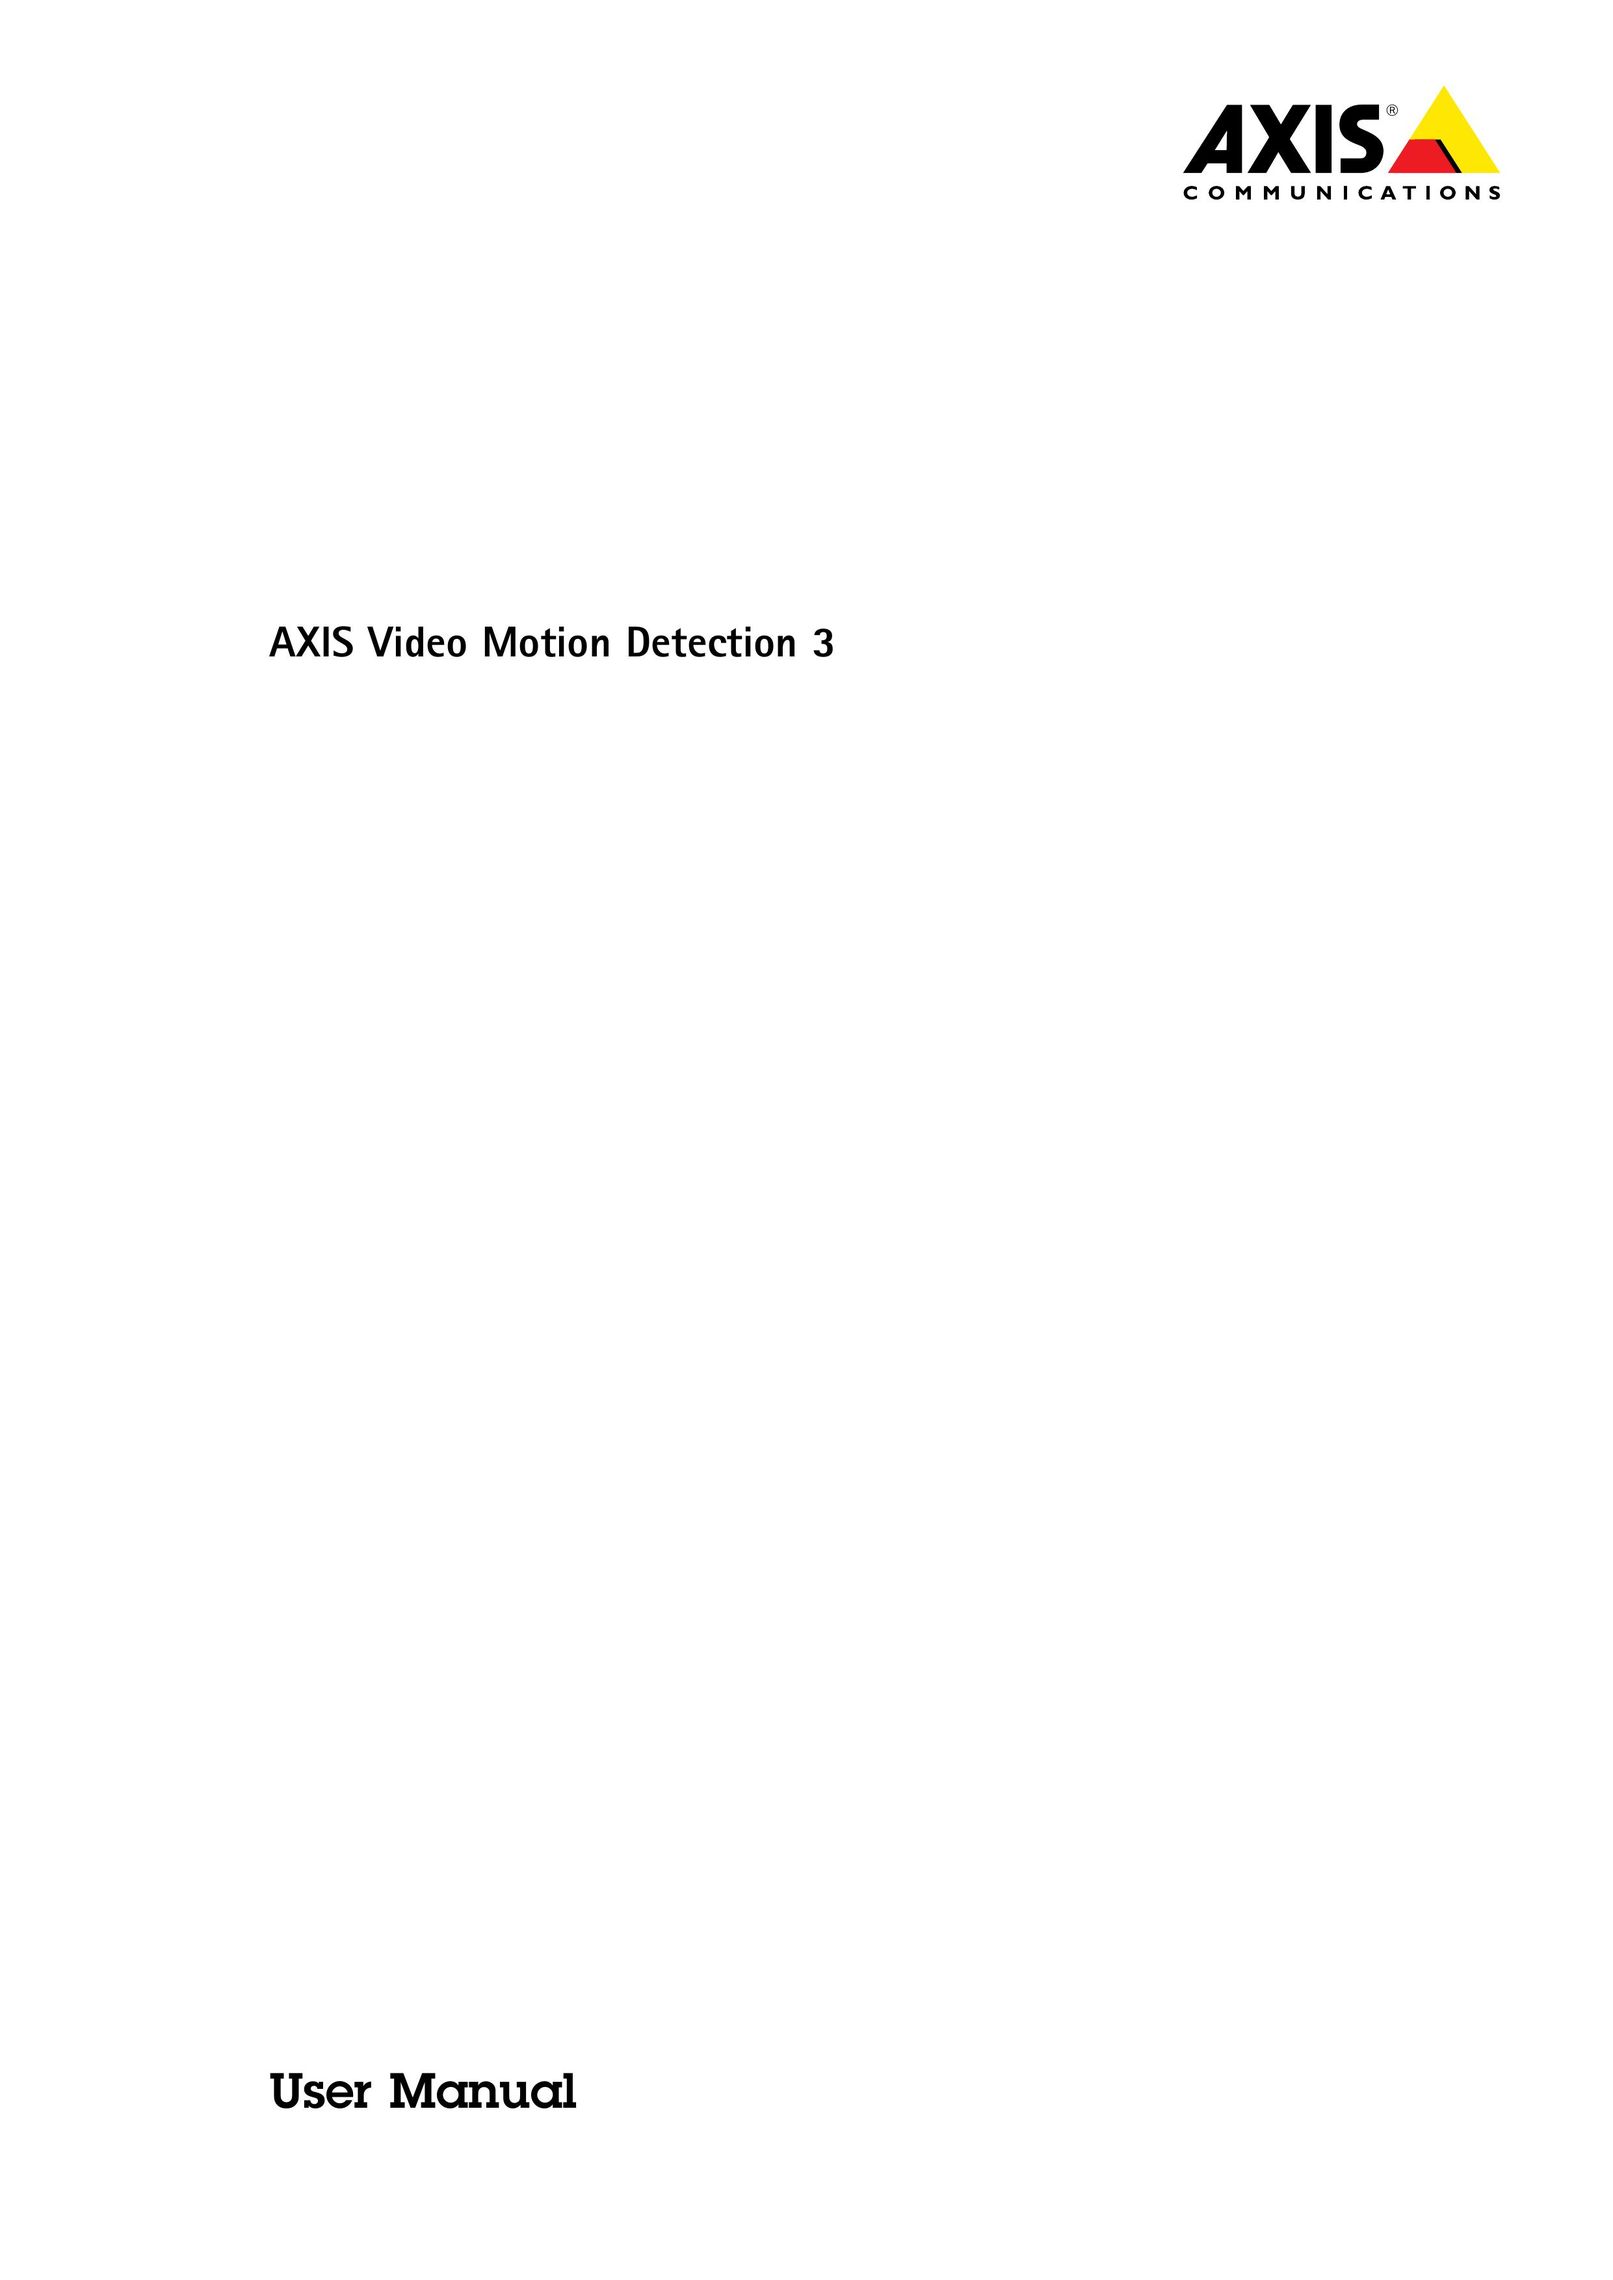 Axis Communications 61339 Home Theater Screen User Manual